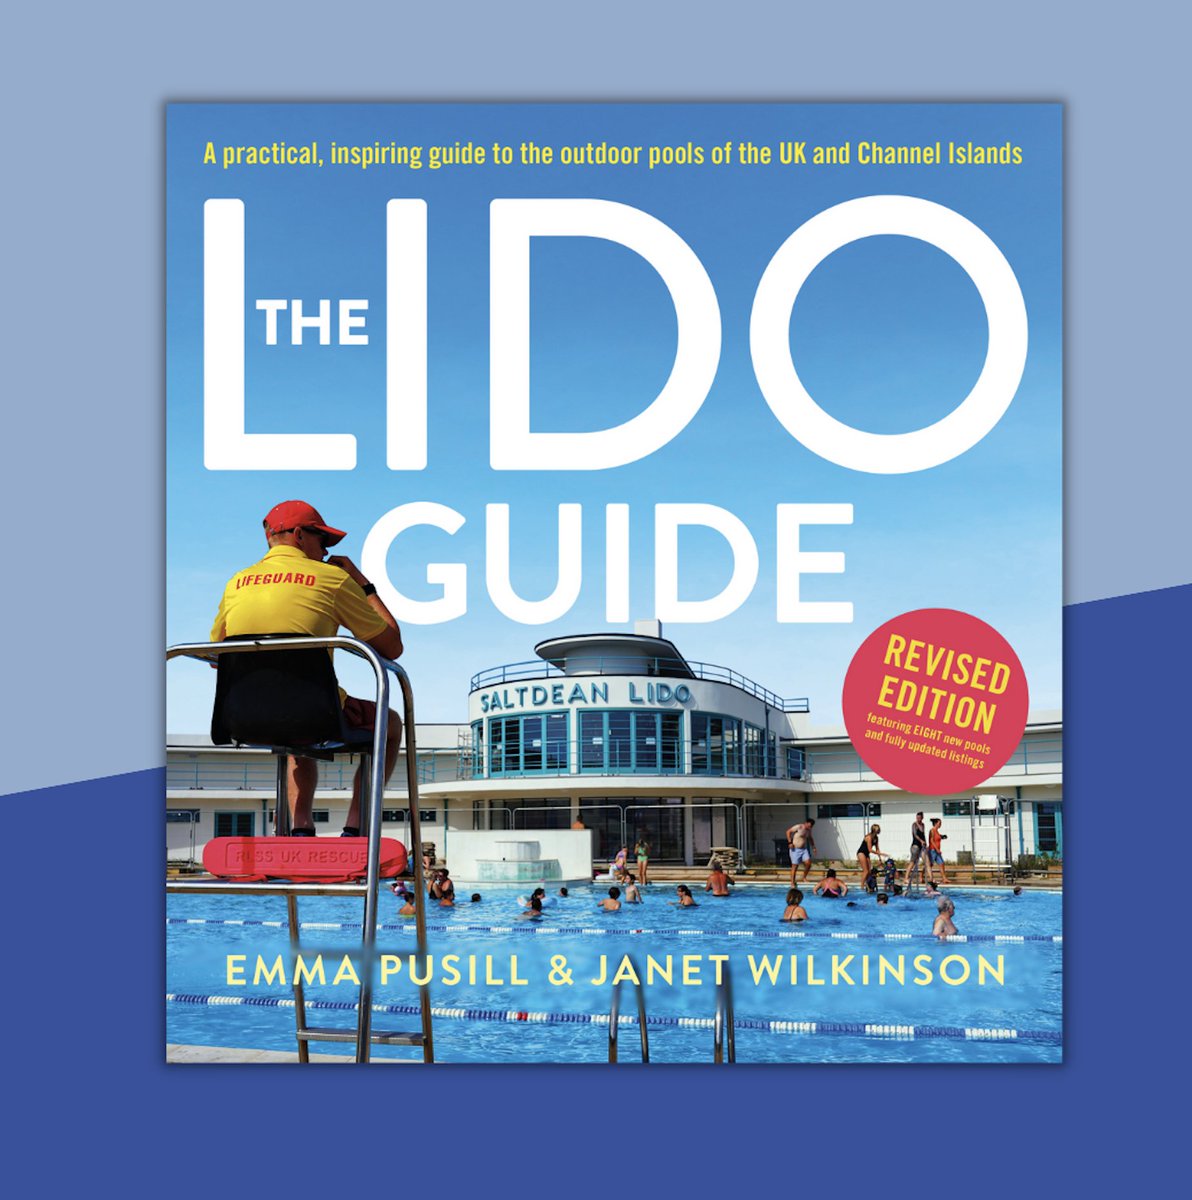 Look! LOOK! Forgive the shouting, but I am so excited to share the lovely new cover that #TheLidoGuide2024 edition will have. Designed by the very talented @mecobtweets. We are particularly thrilled that @SaltdeanLido has been chosen as the cover girl by @unbounders